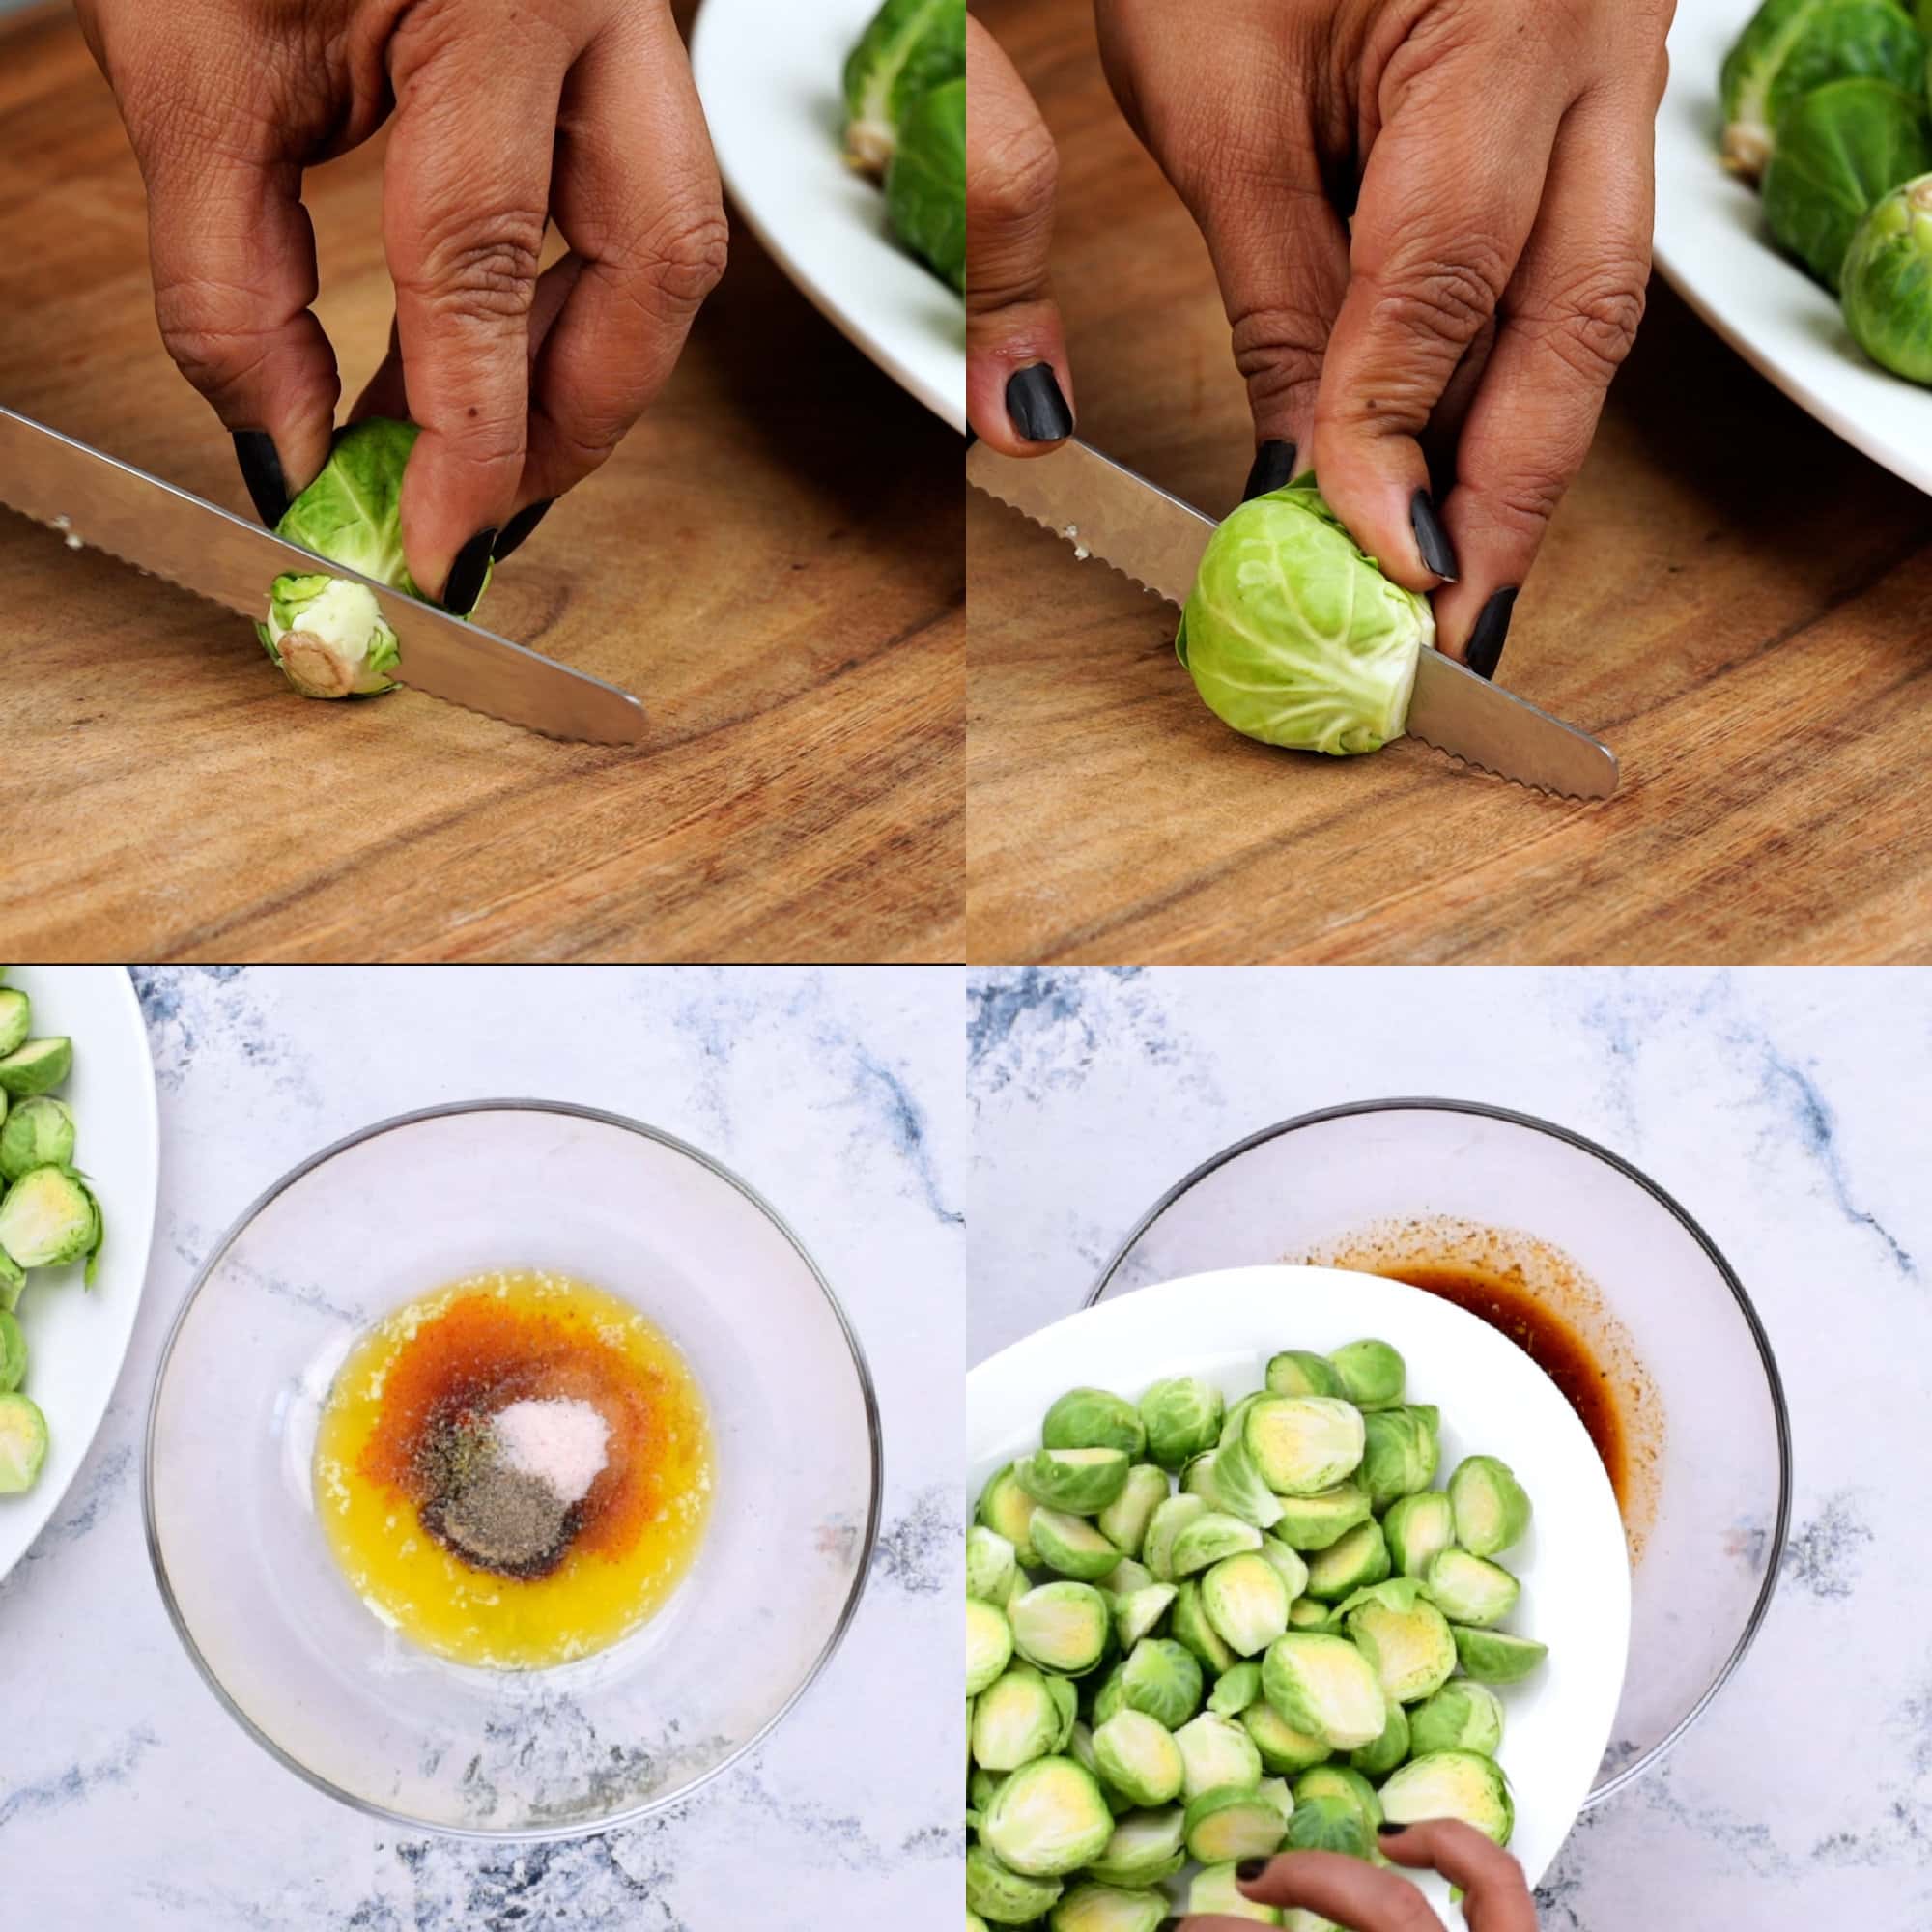 Collage showing steps on how to chop and mix seasoning for roasted brussels sprouts